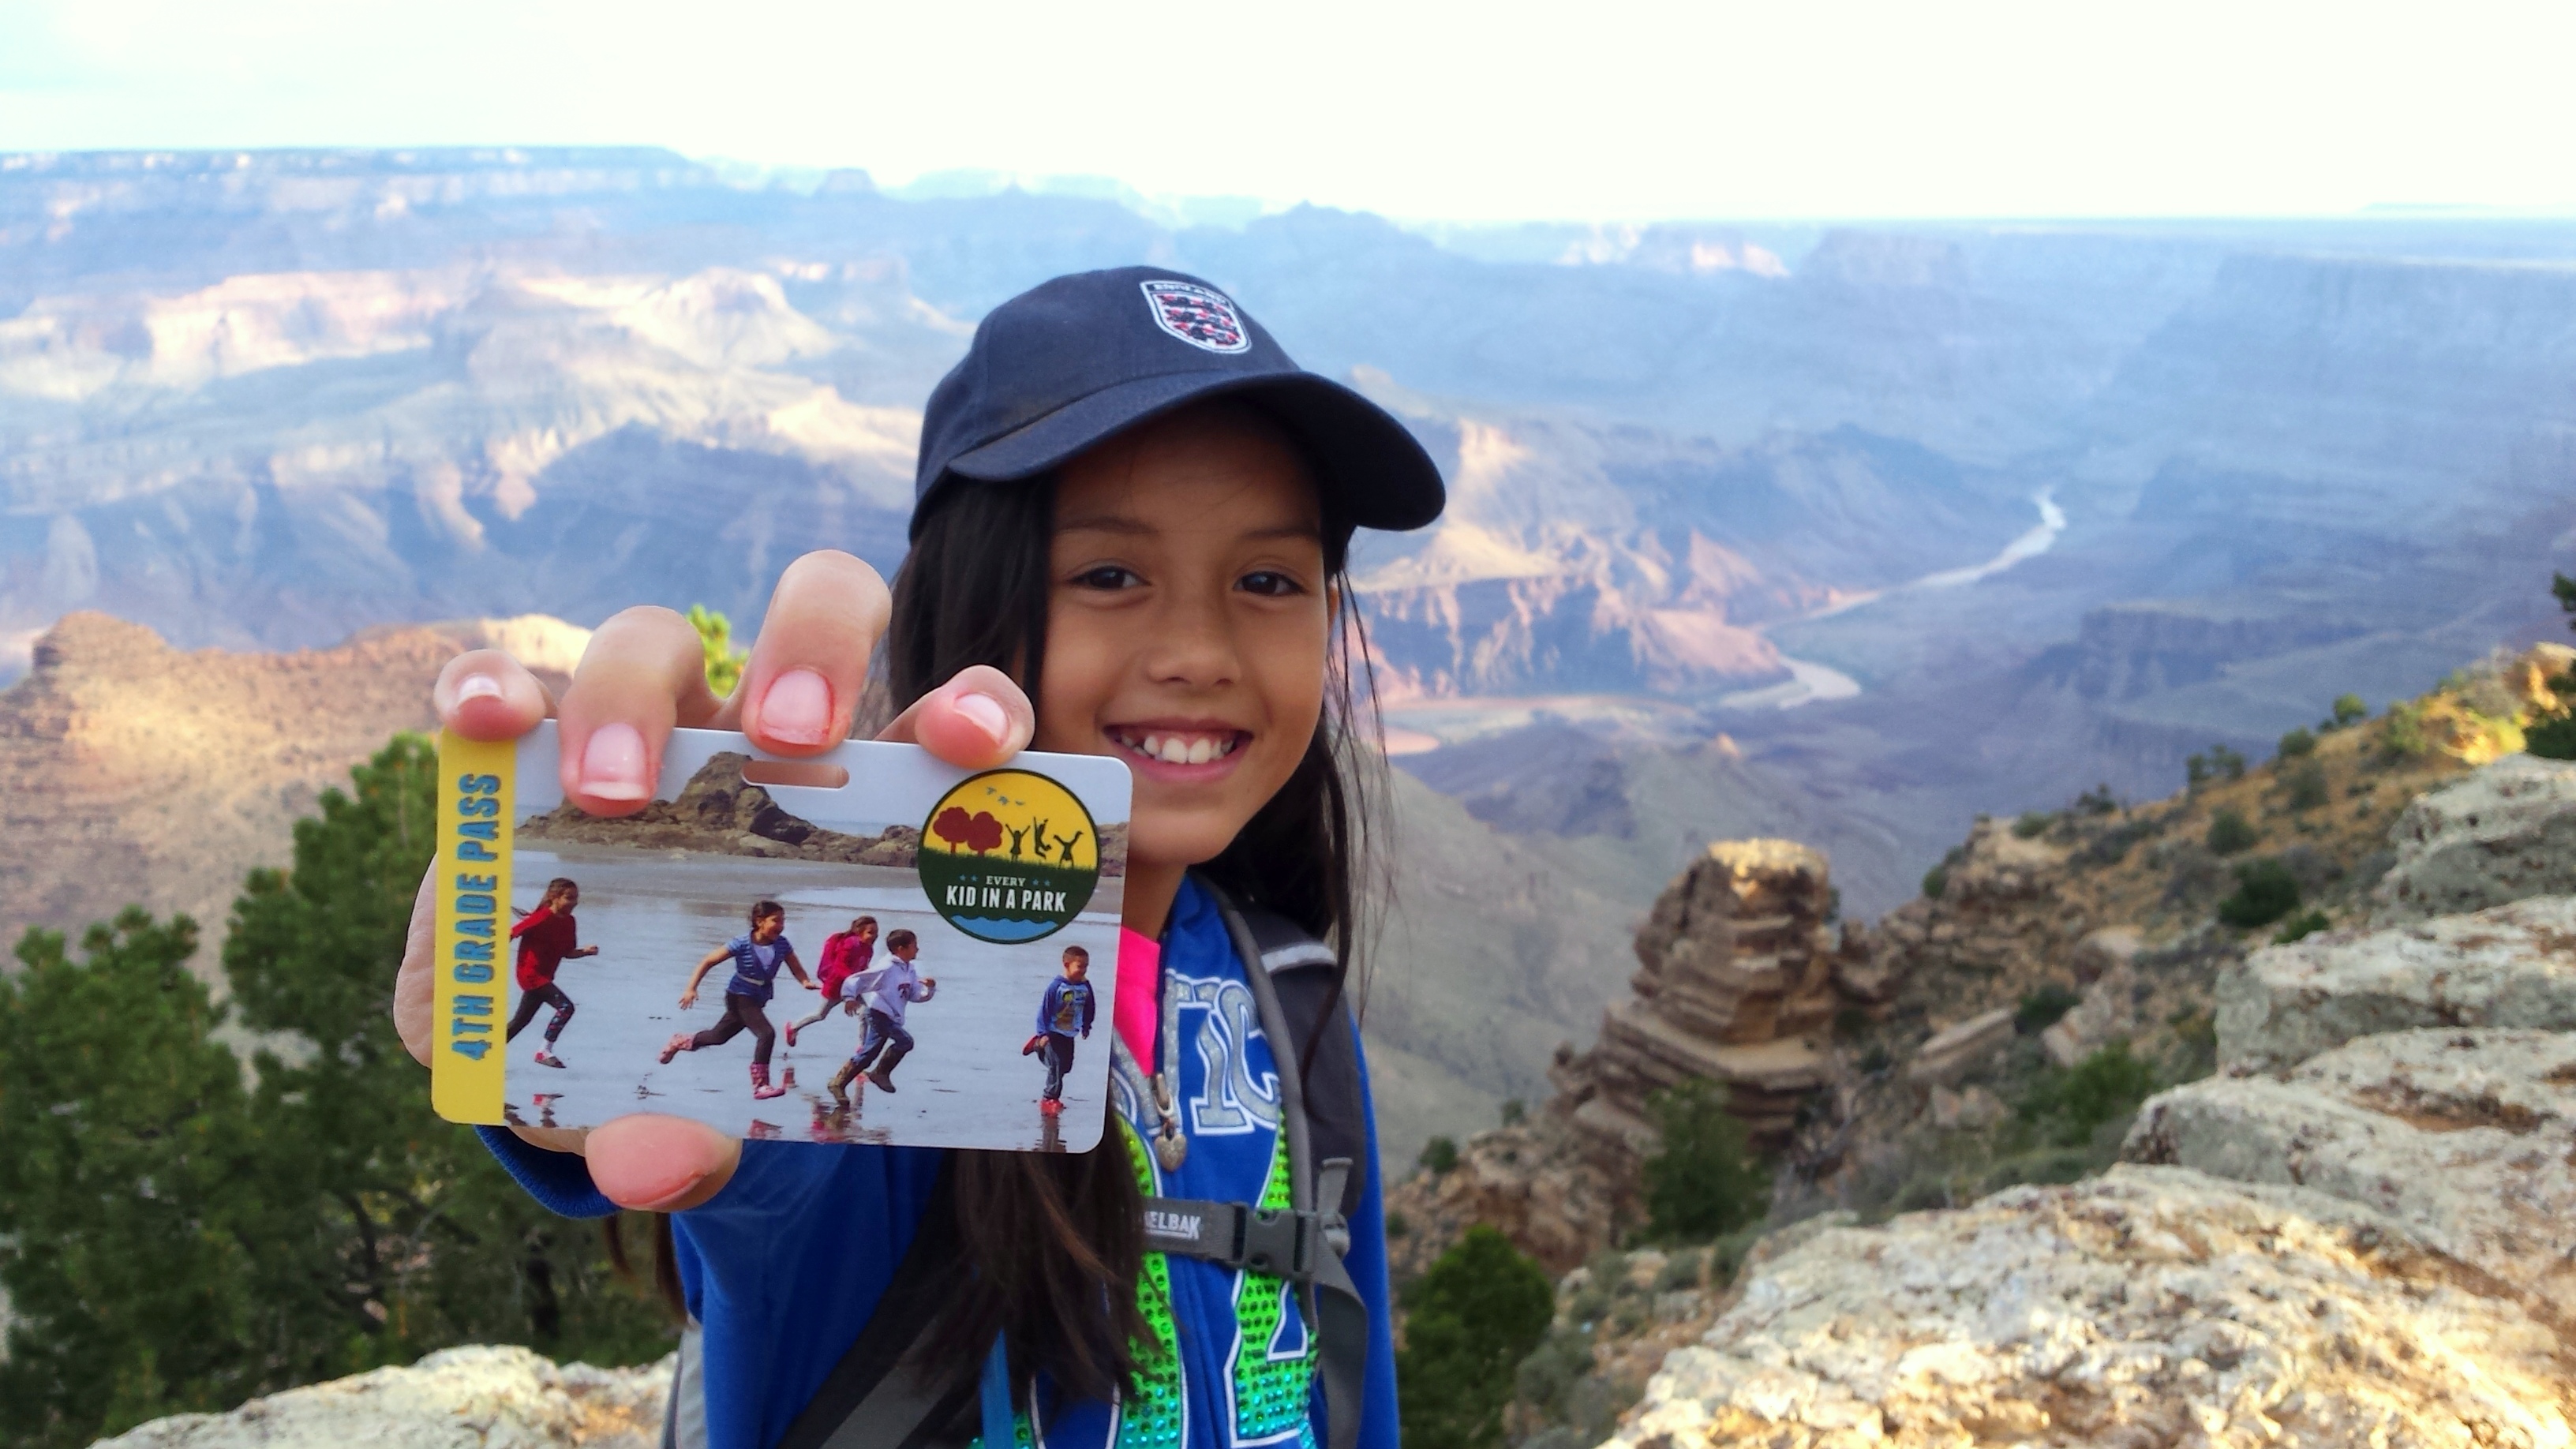 Tips for Exploring the National Parks with Kids by Jessica Nave for Hike it Baby